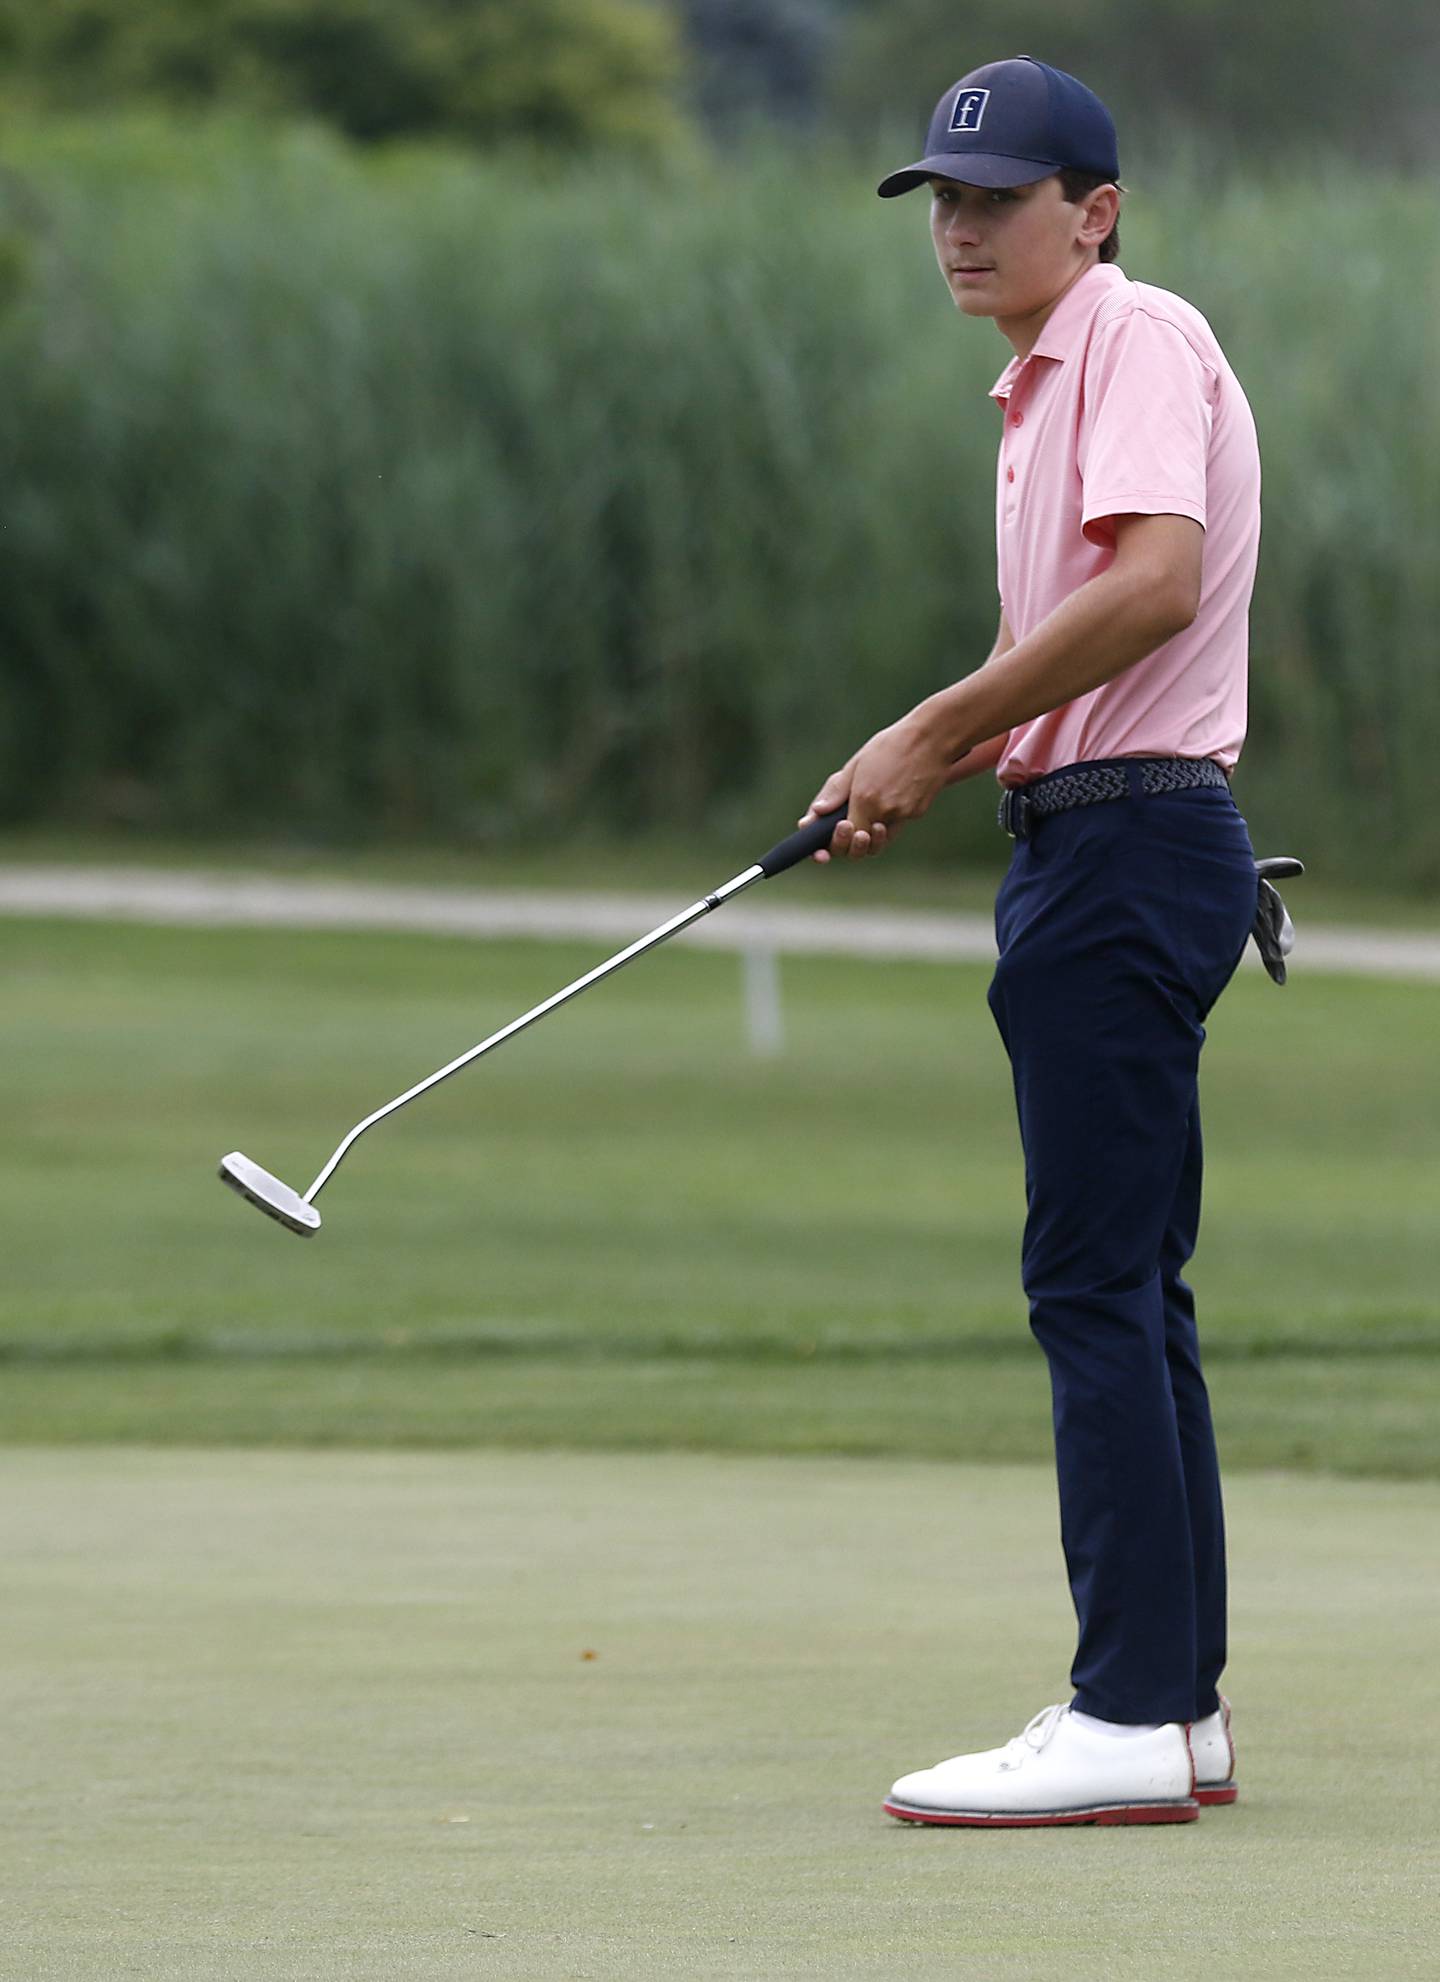 Marian Central’s Peter Louise watches his putt on the ninth green of the Prairie course Wednesday, July 12, 2023, during the second round of the the McHenry County Junior Golf Association's McHenry County Junior Amateur tournament at Boone Creek Golf Club, in Bull Valley.